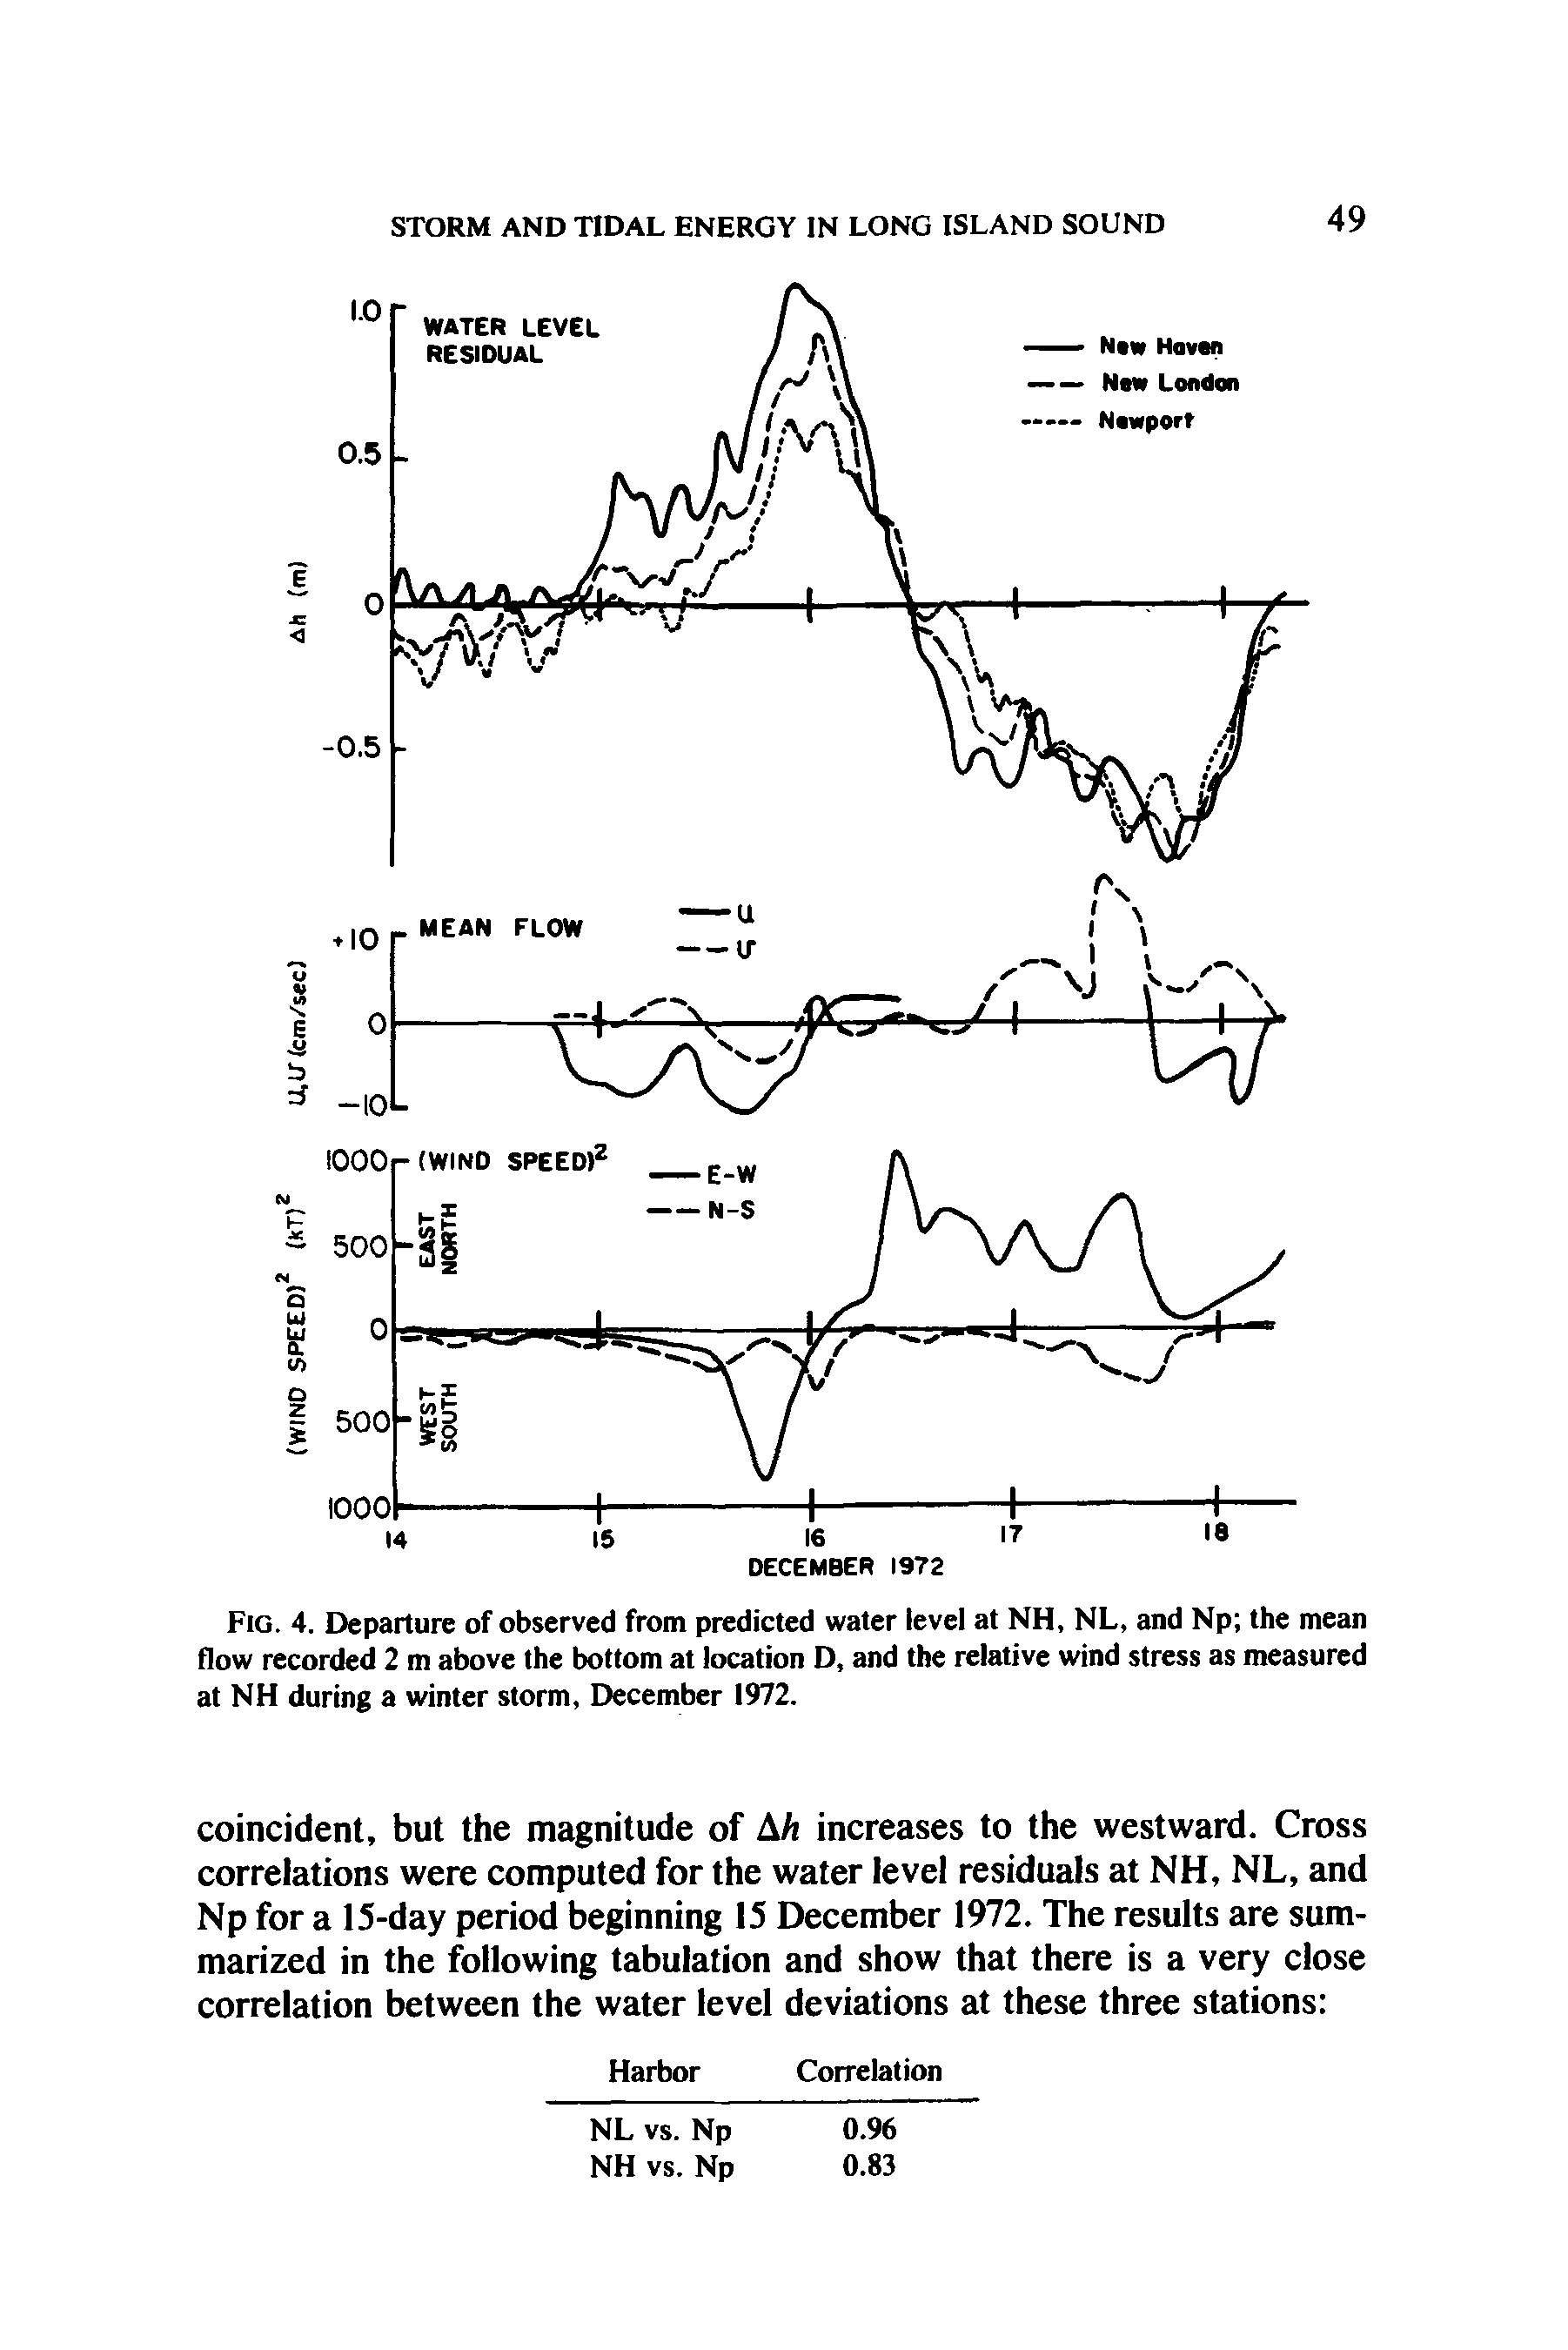 Fig. 4. Departure of observed from predicted water level at NH, NL, and Np the mean flow recorded 2 m above the bottom at location D, and the relative wind stress as measured at NH during a winter storm, December 1972.